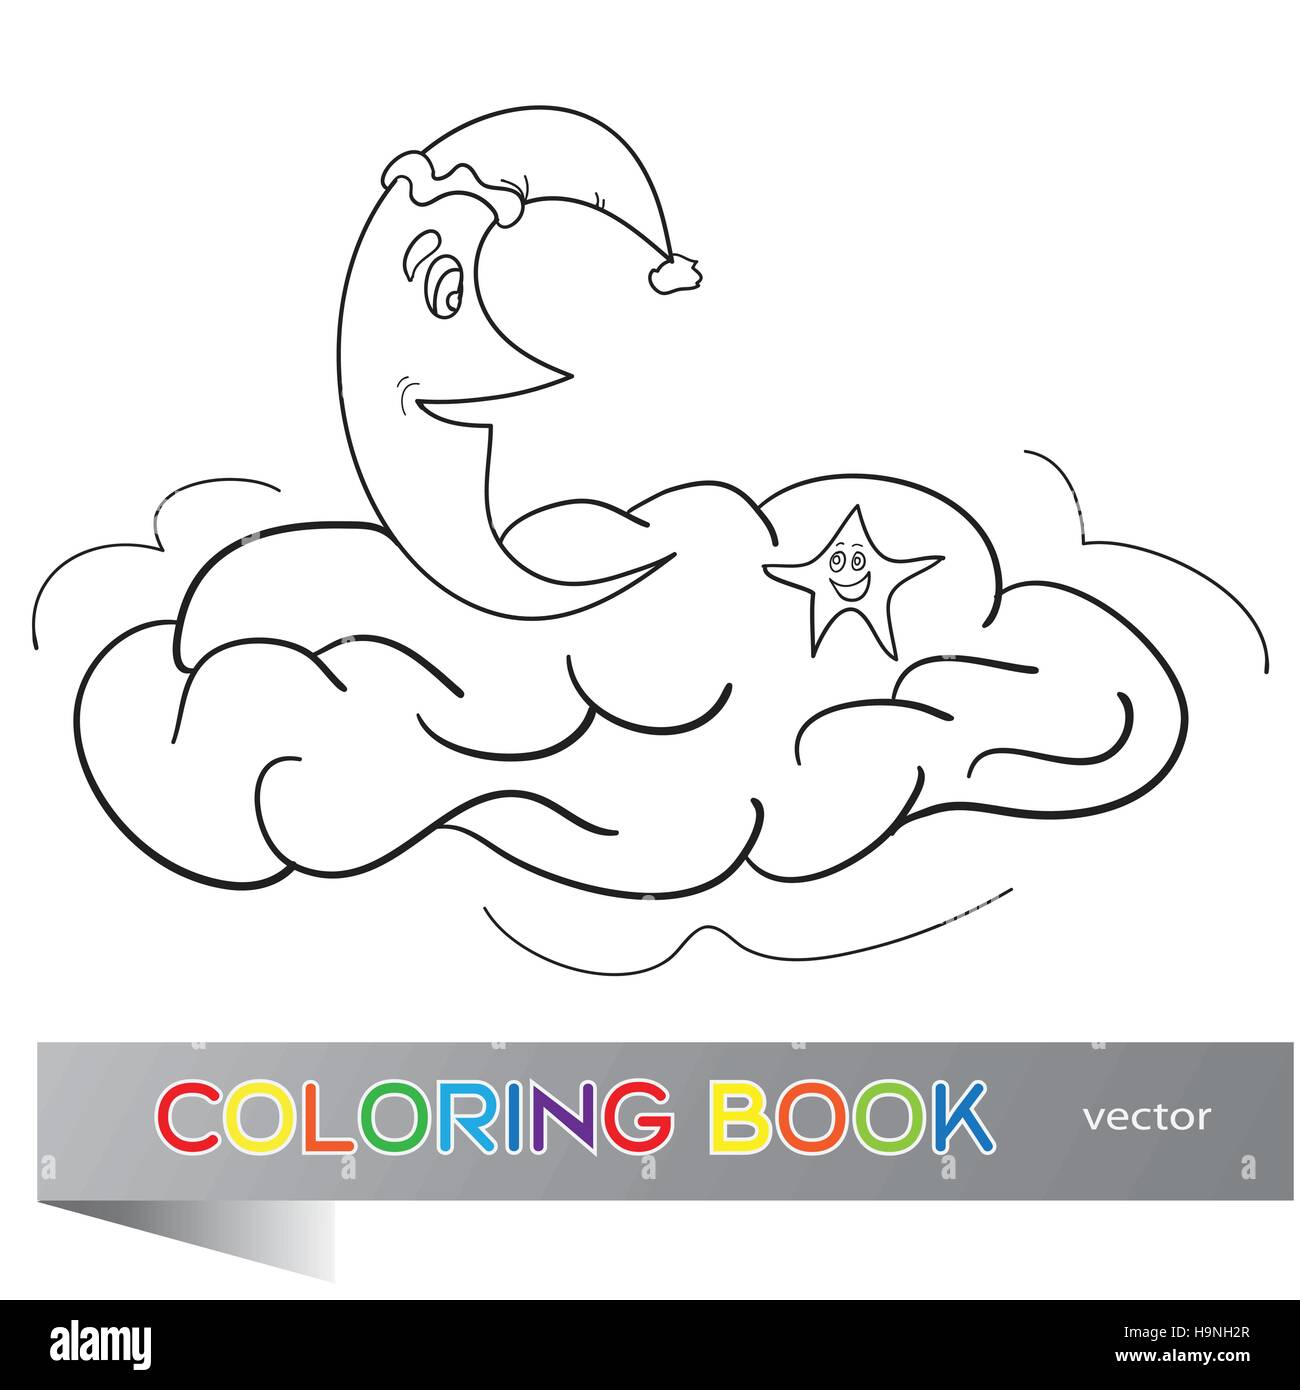 The coloring book - illustration for the children Stock Vector